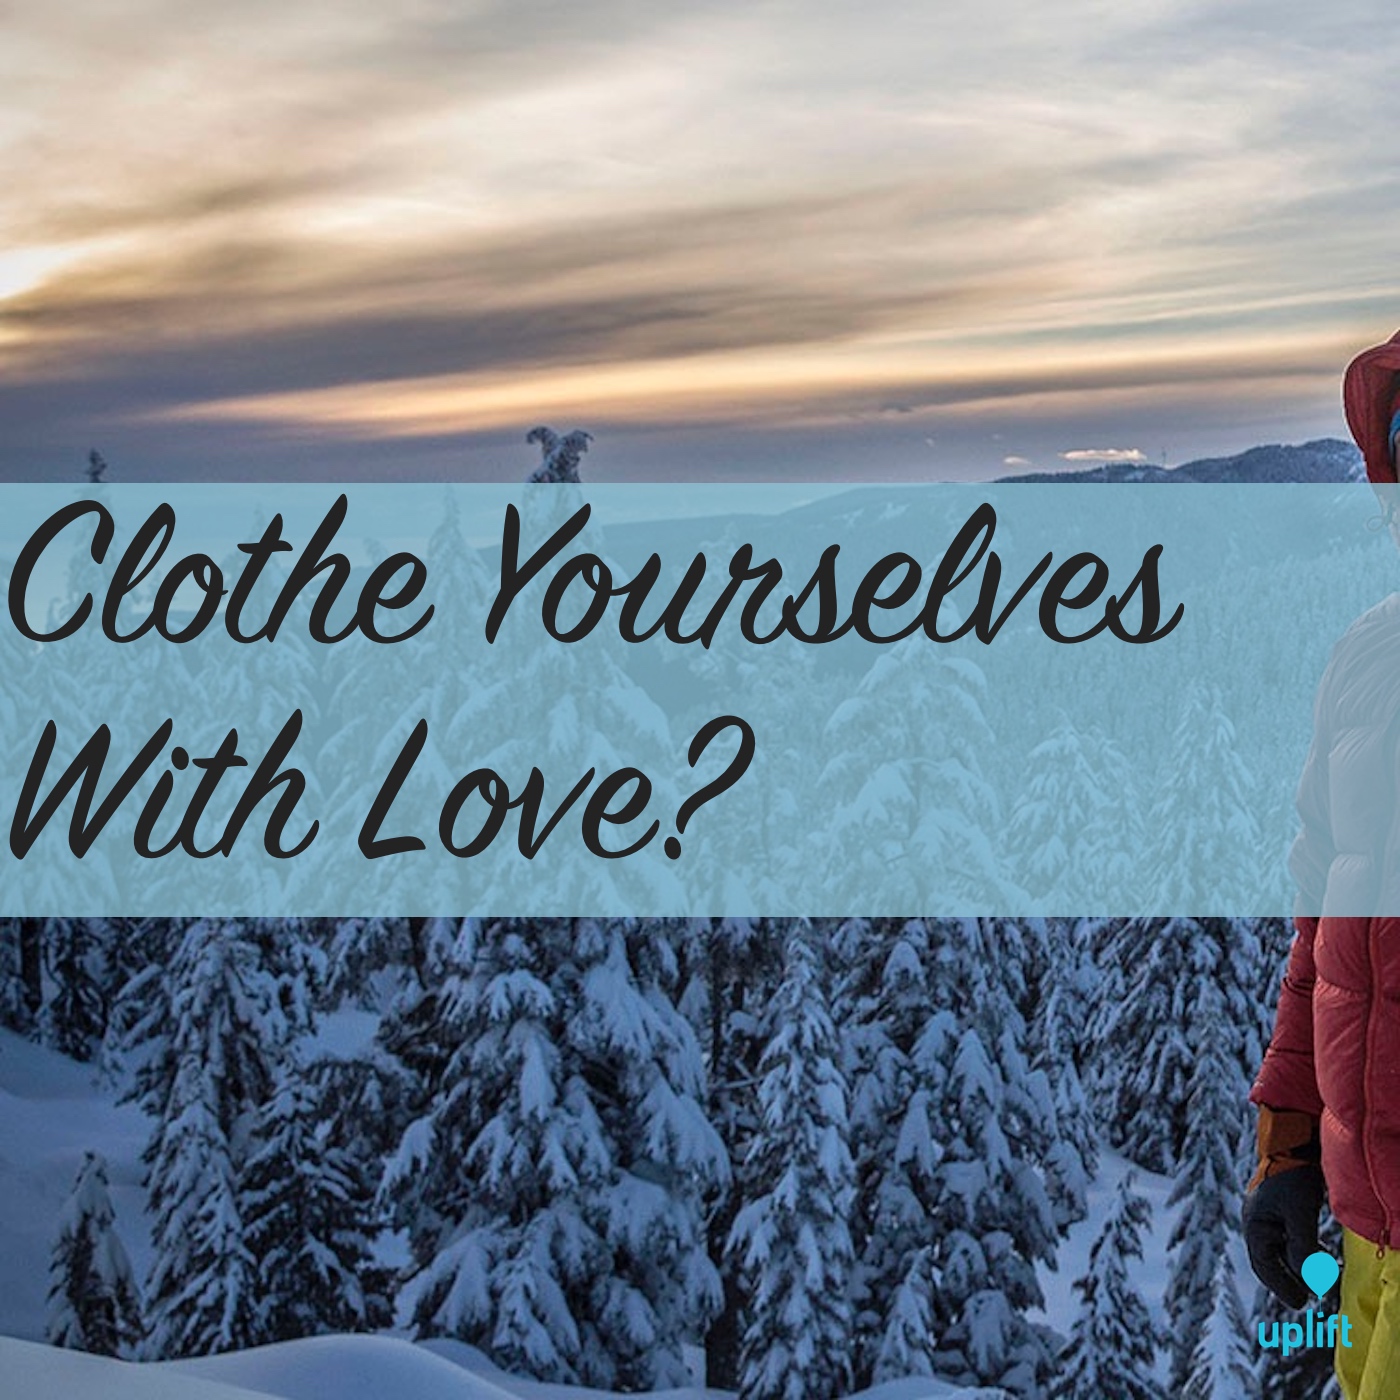 Episode 33: Clothe Yourselves With Love?